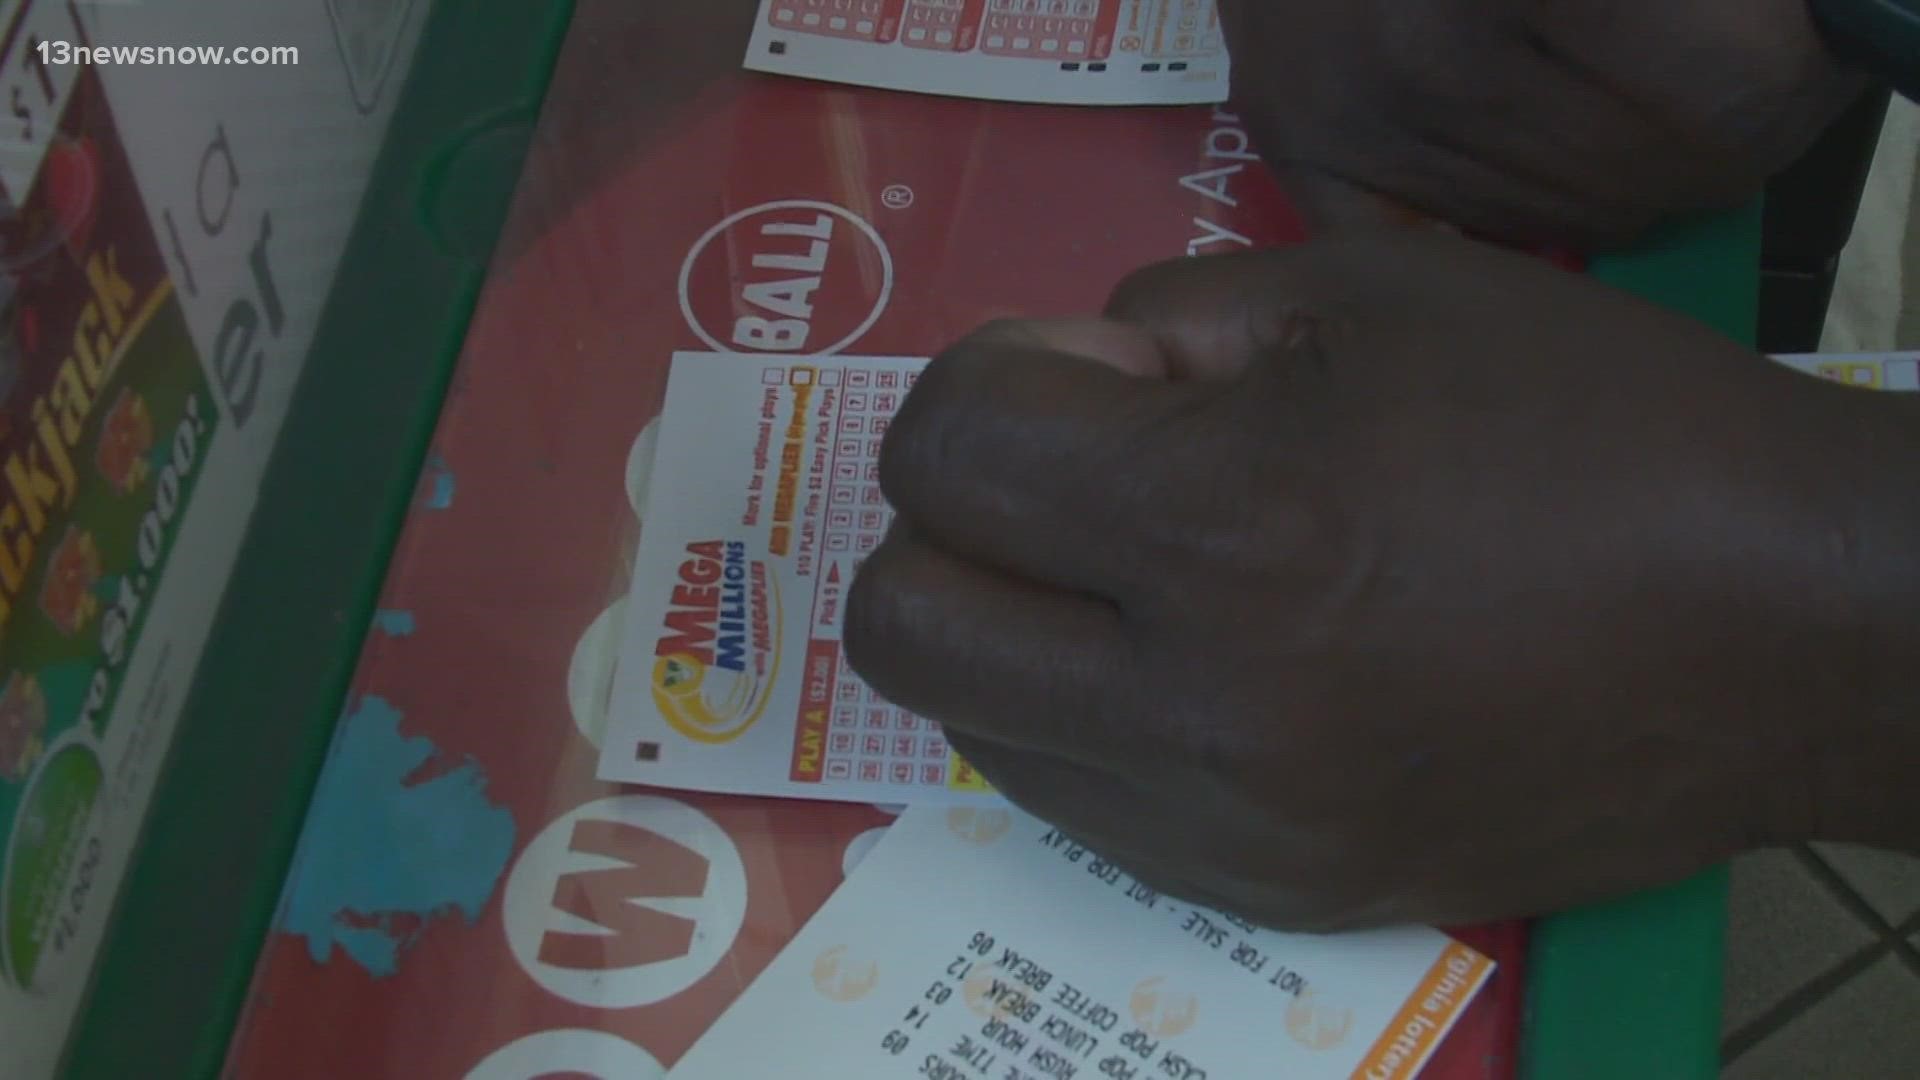 The Virginia Lottery said there were four tickets sold in Virginia that each won $10,000. One of the winning tickets was sold at a Virginia Beach 7-Eleven.